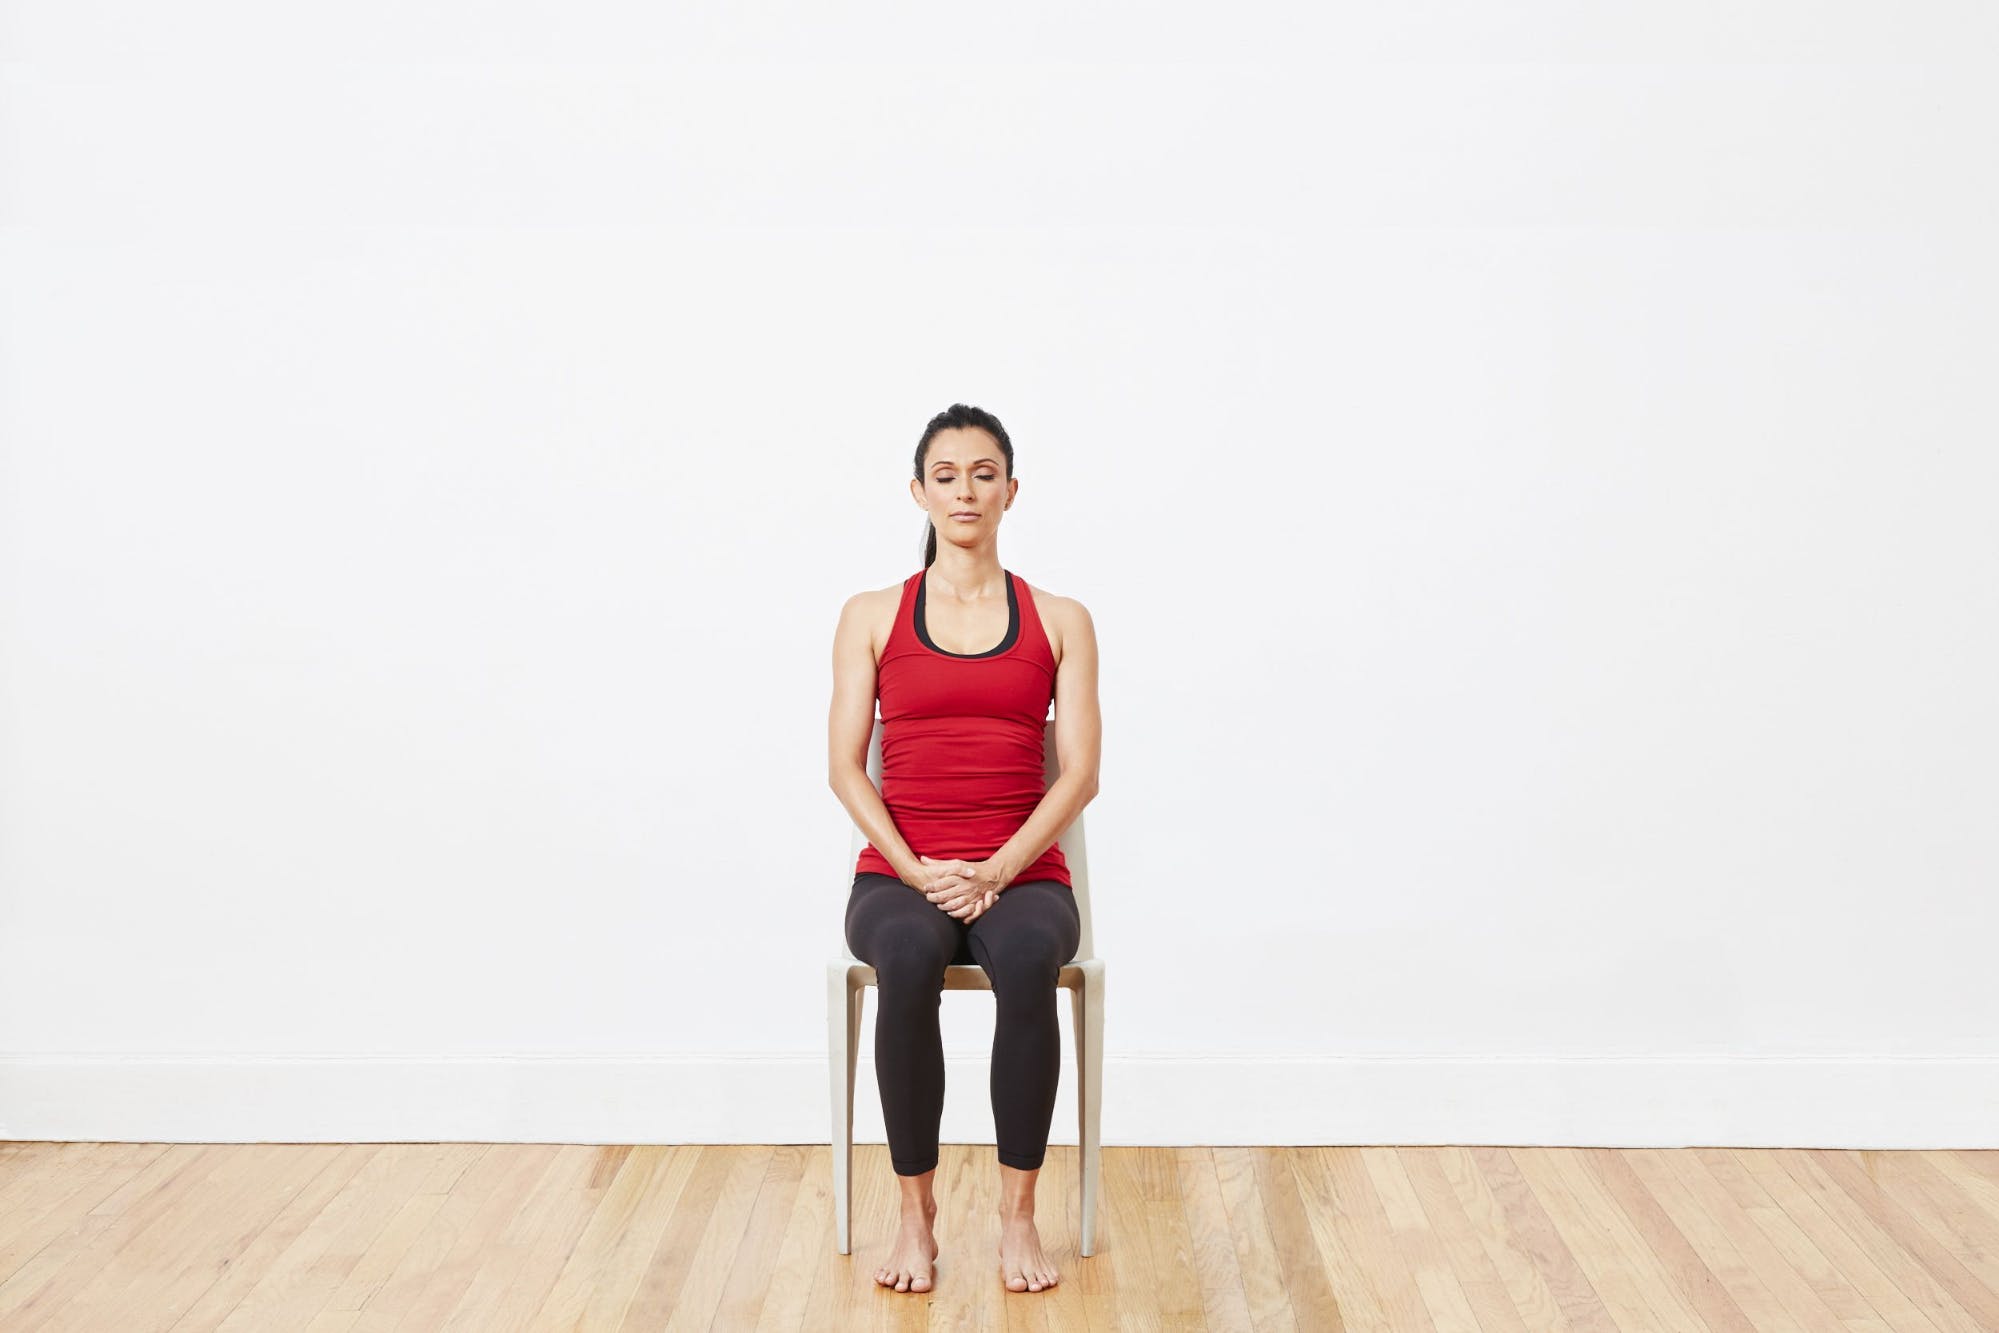 Yoga exercises for people with shoulder pain: breathing exercises